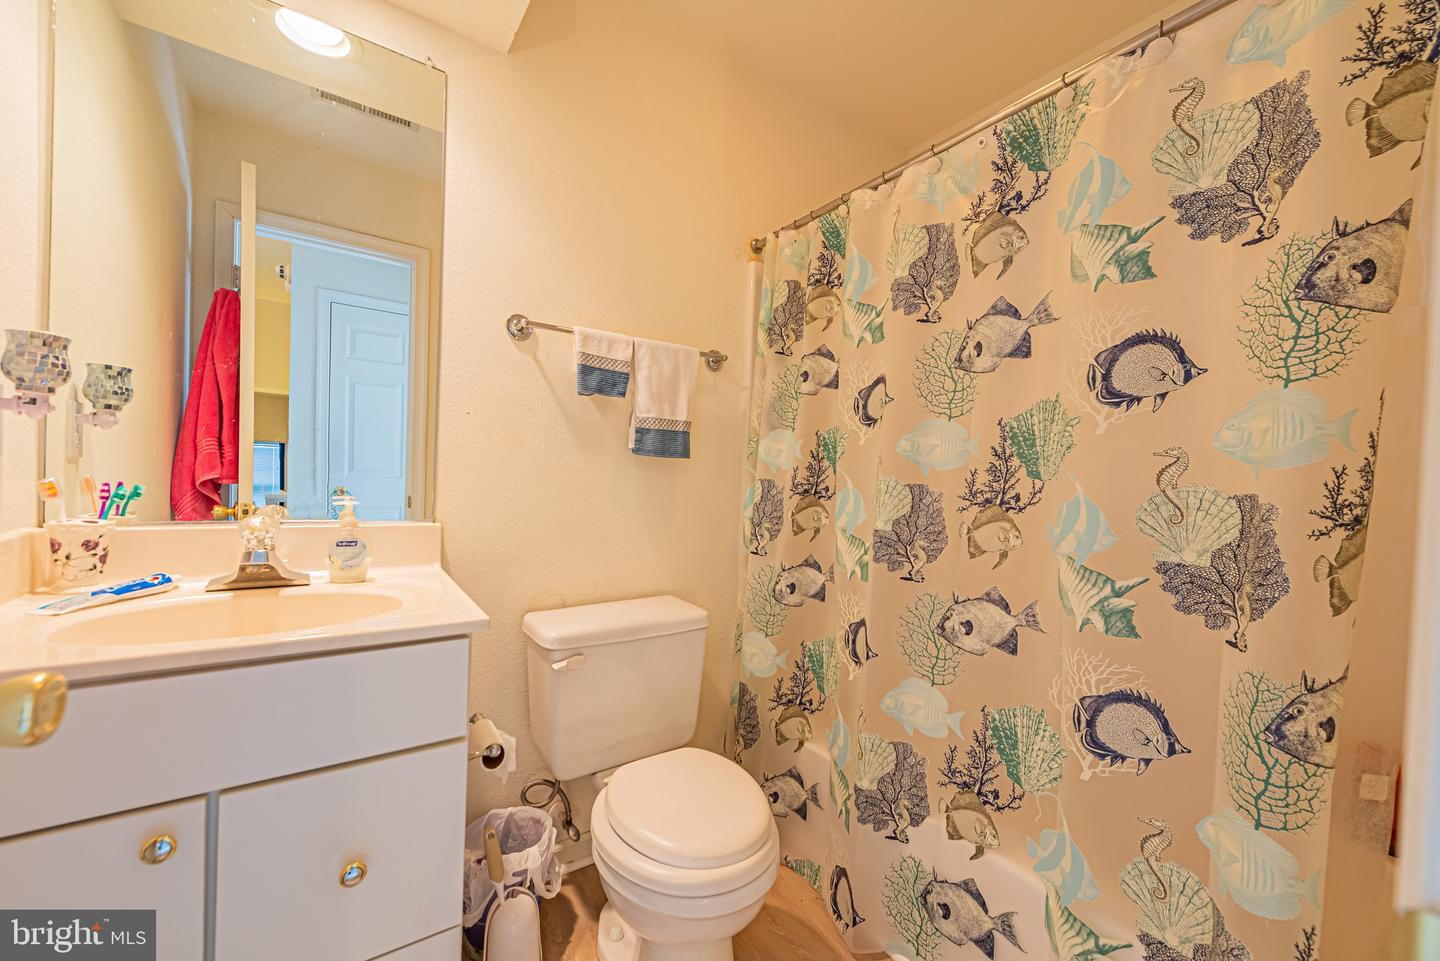 34055 Monterray Avenue Unit 173, Frankford, Delaware, 19945, United States, 3 Bedrooms Bedrooms, ,3 BathroomsBathrooms,Residential,For Sale,34055 Monterray Avenue Unit 173,1460197